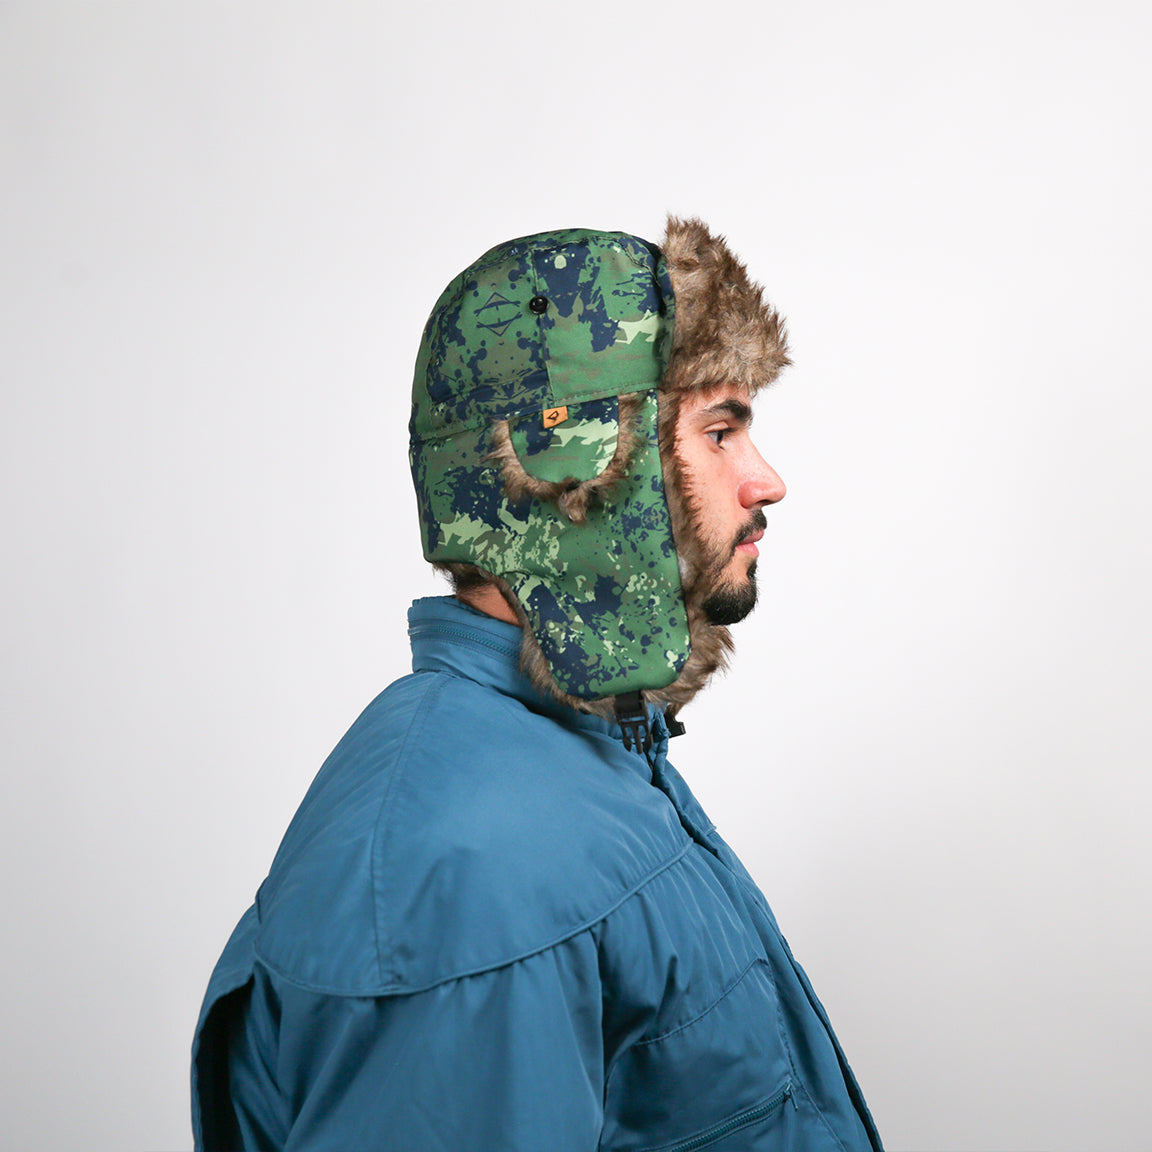 Pictured is a person wearing an aviator hat with a green camo pattern and brown faux fur lining. The design includes functional ear flaps and a buttoned chin strap, suited for outdoor activities.